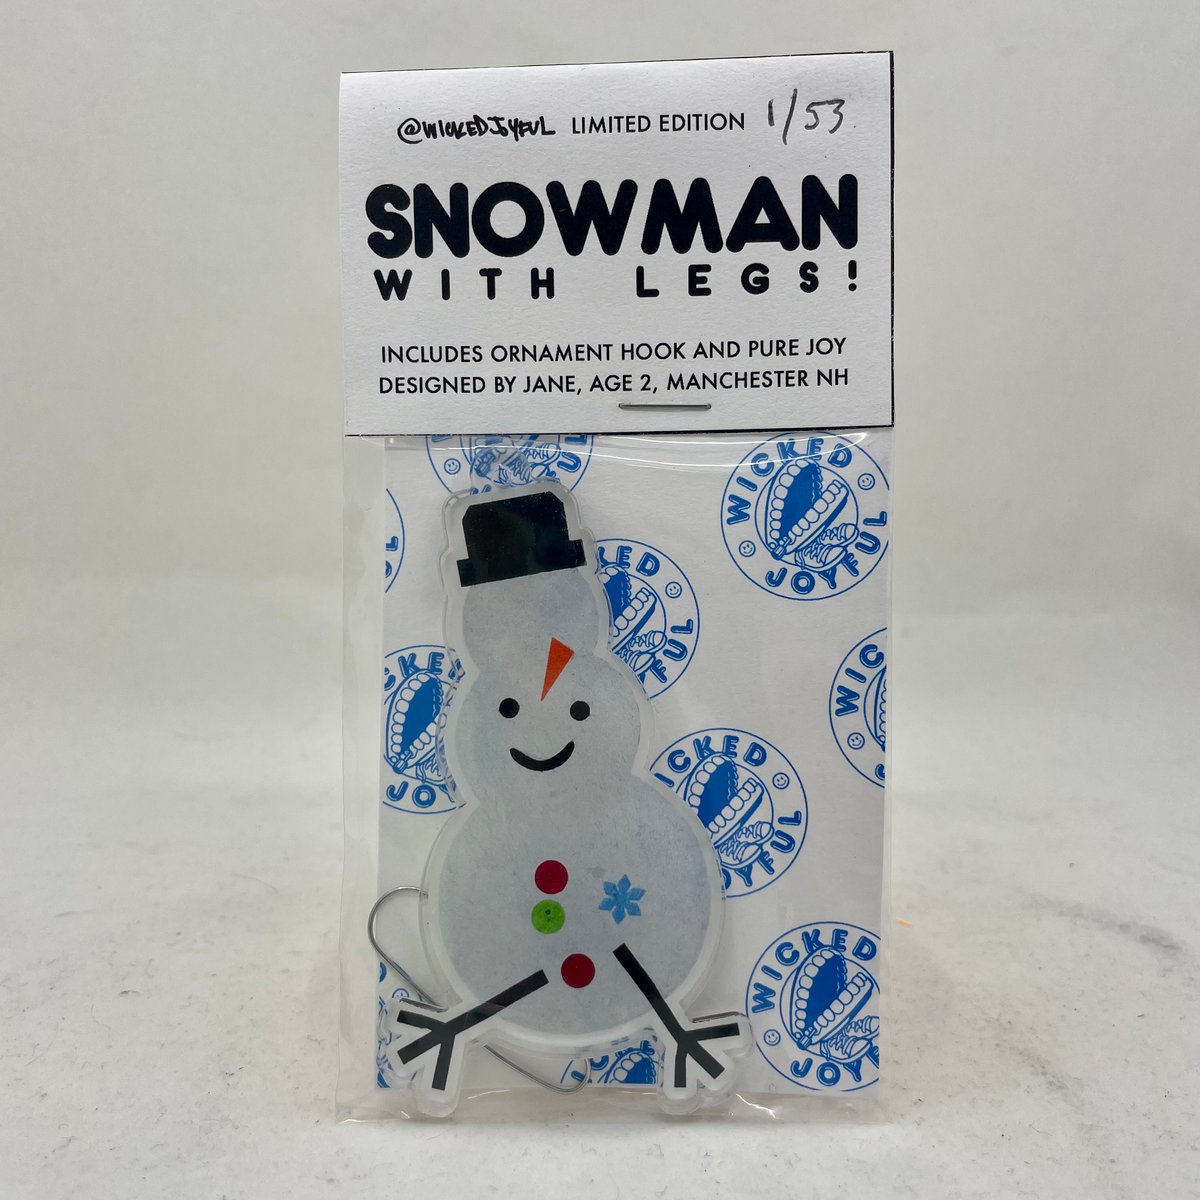 Snowman with Legs Ornament